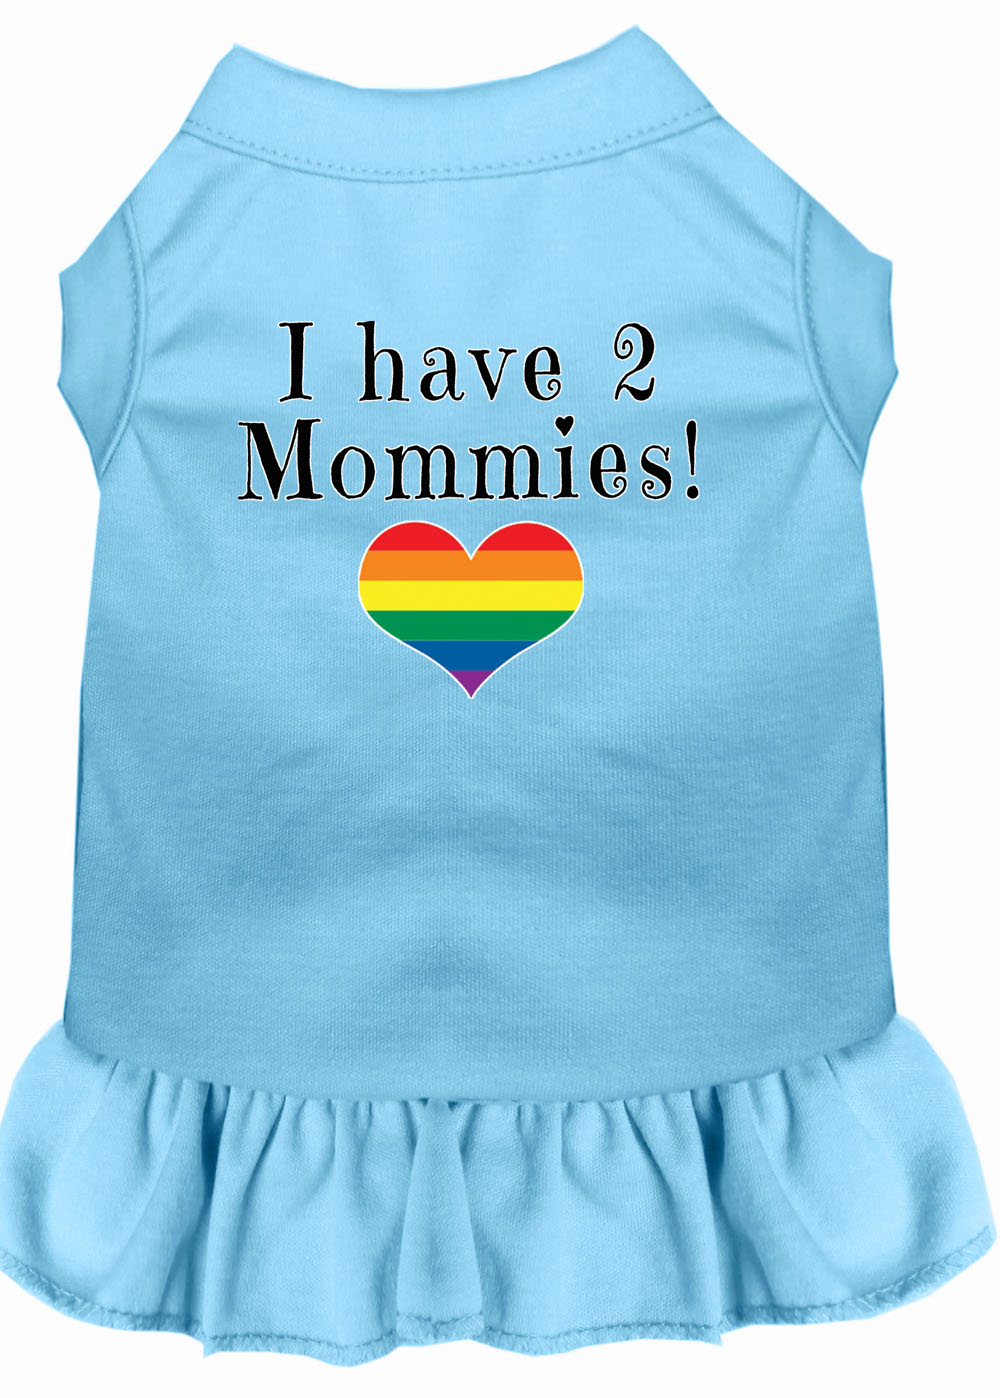 I Have 2 Mommies Screen Print Dog Dress Baby Blue Med